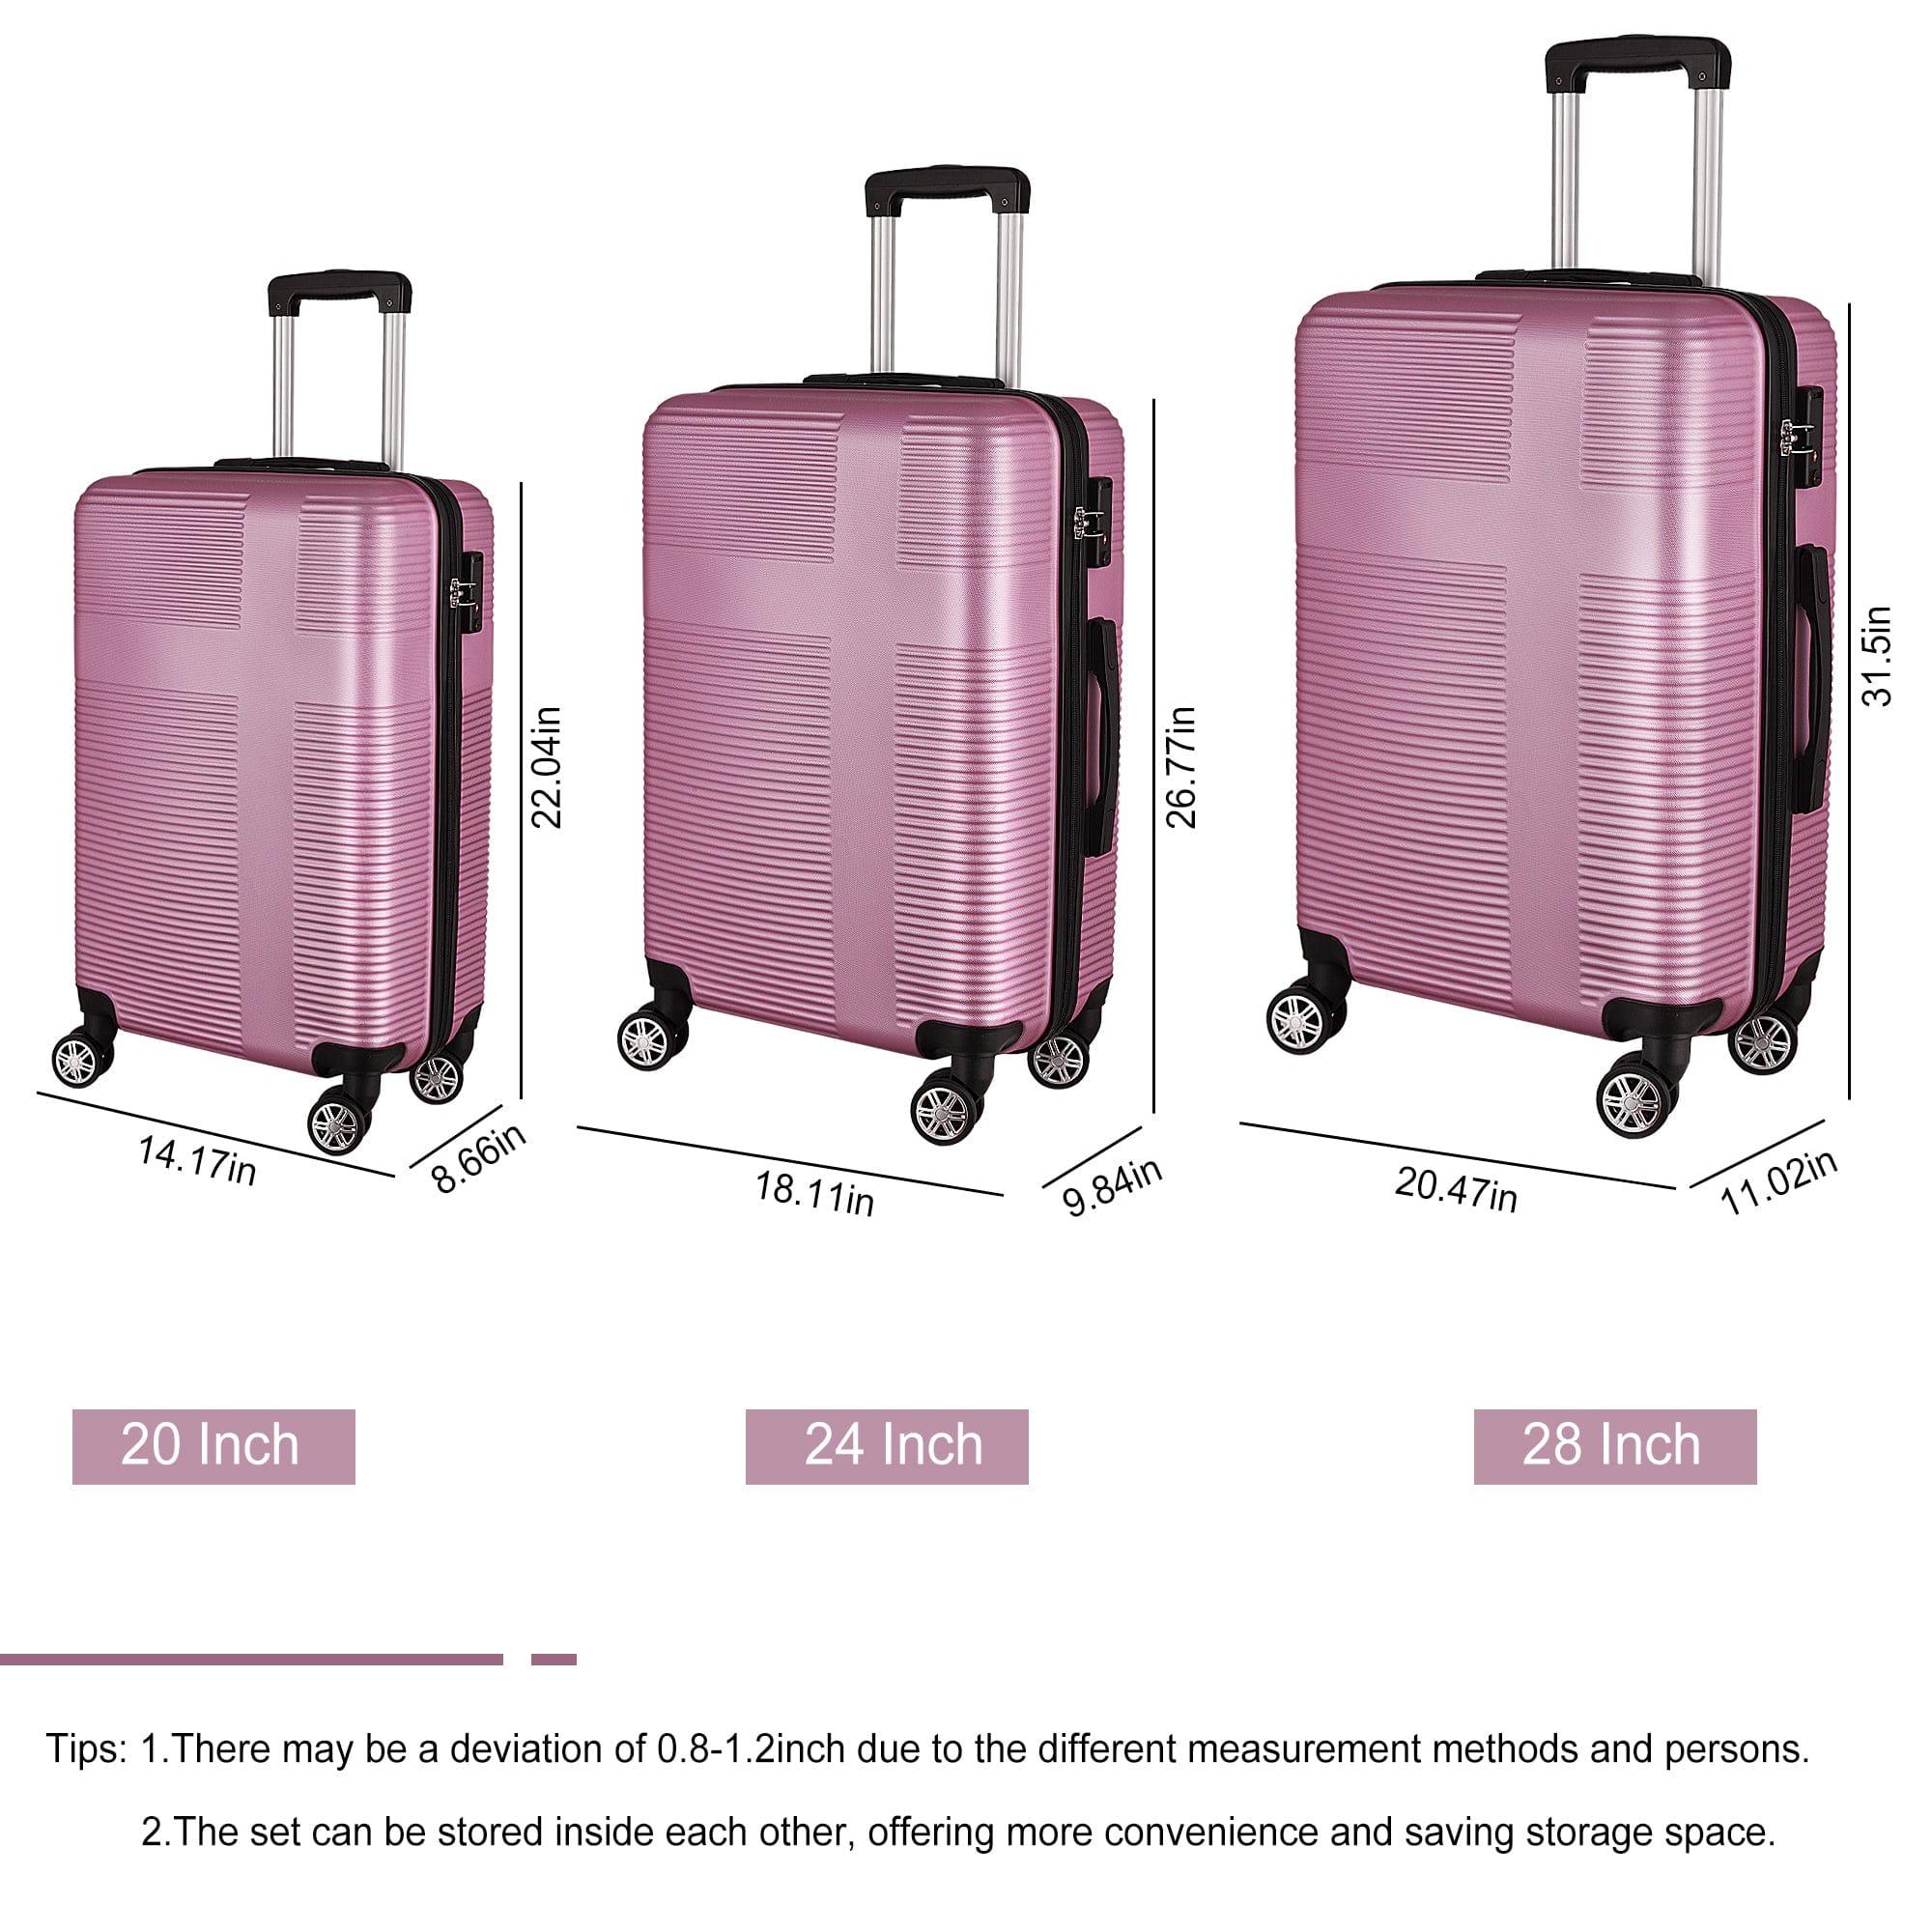 Shop 3 Piece Luggage with TSA Lock ABS, Durable Luggage Set, Lightweight Suitcase with Hooks, Spinner Wheels Cross Stripe Luggage Sets 20in/24in/28in Mademoiselle Home Decor